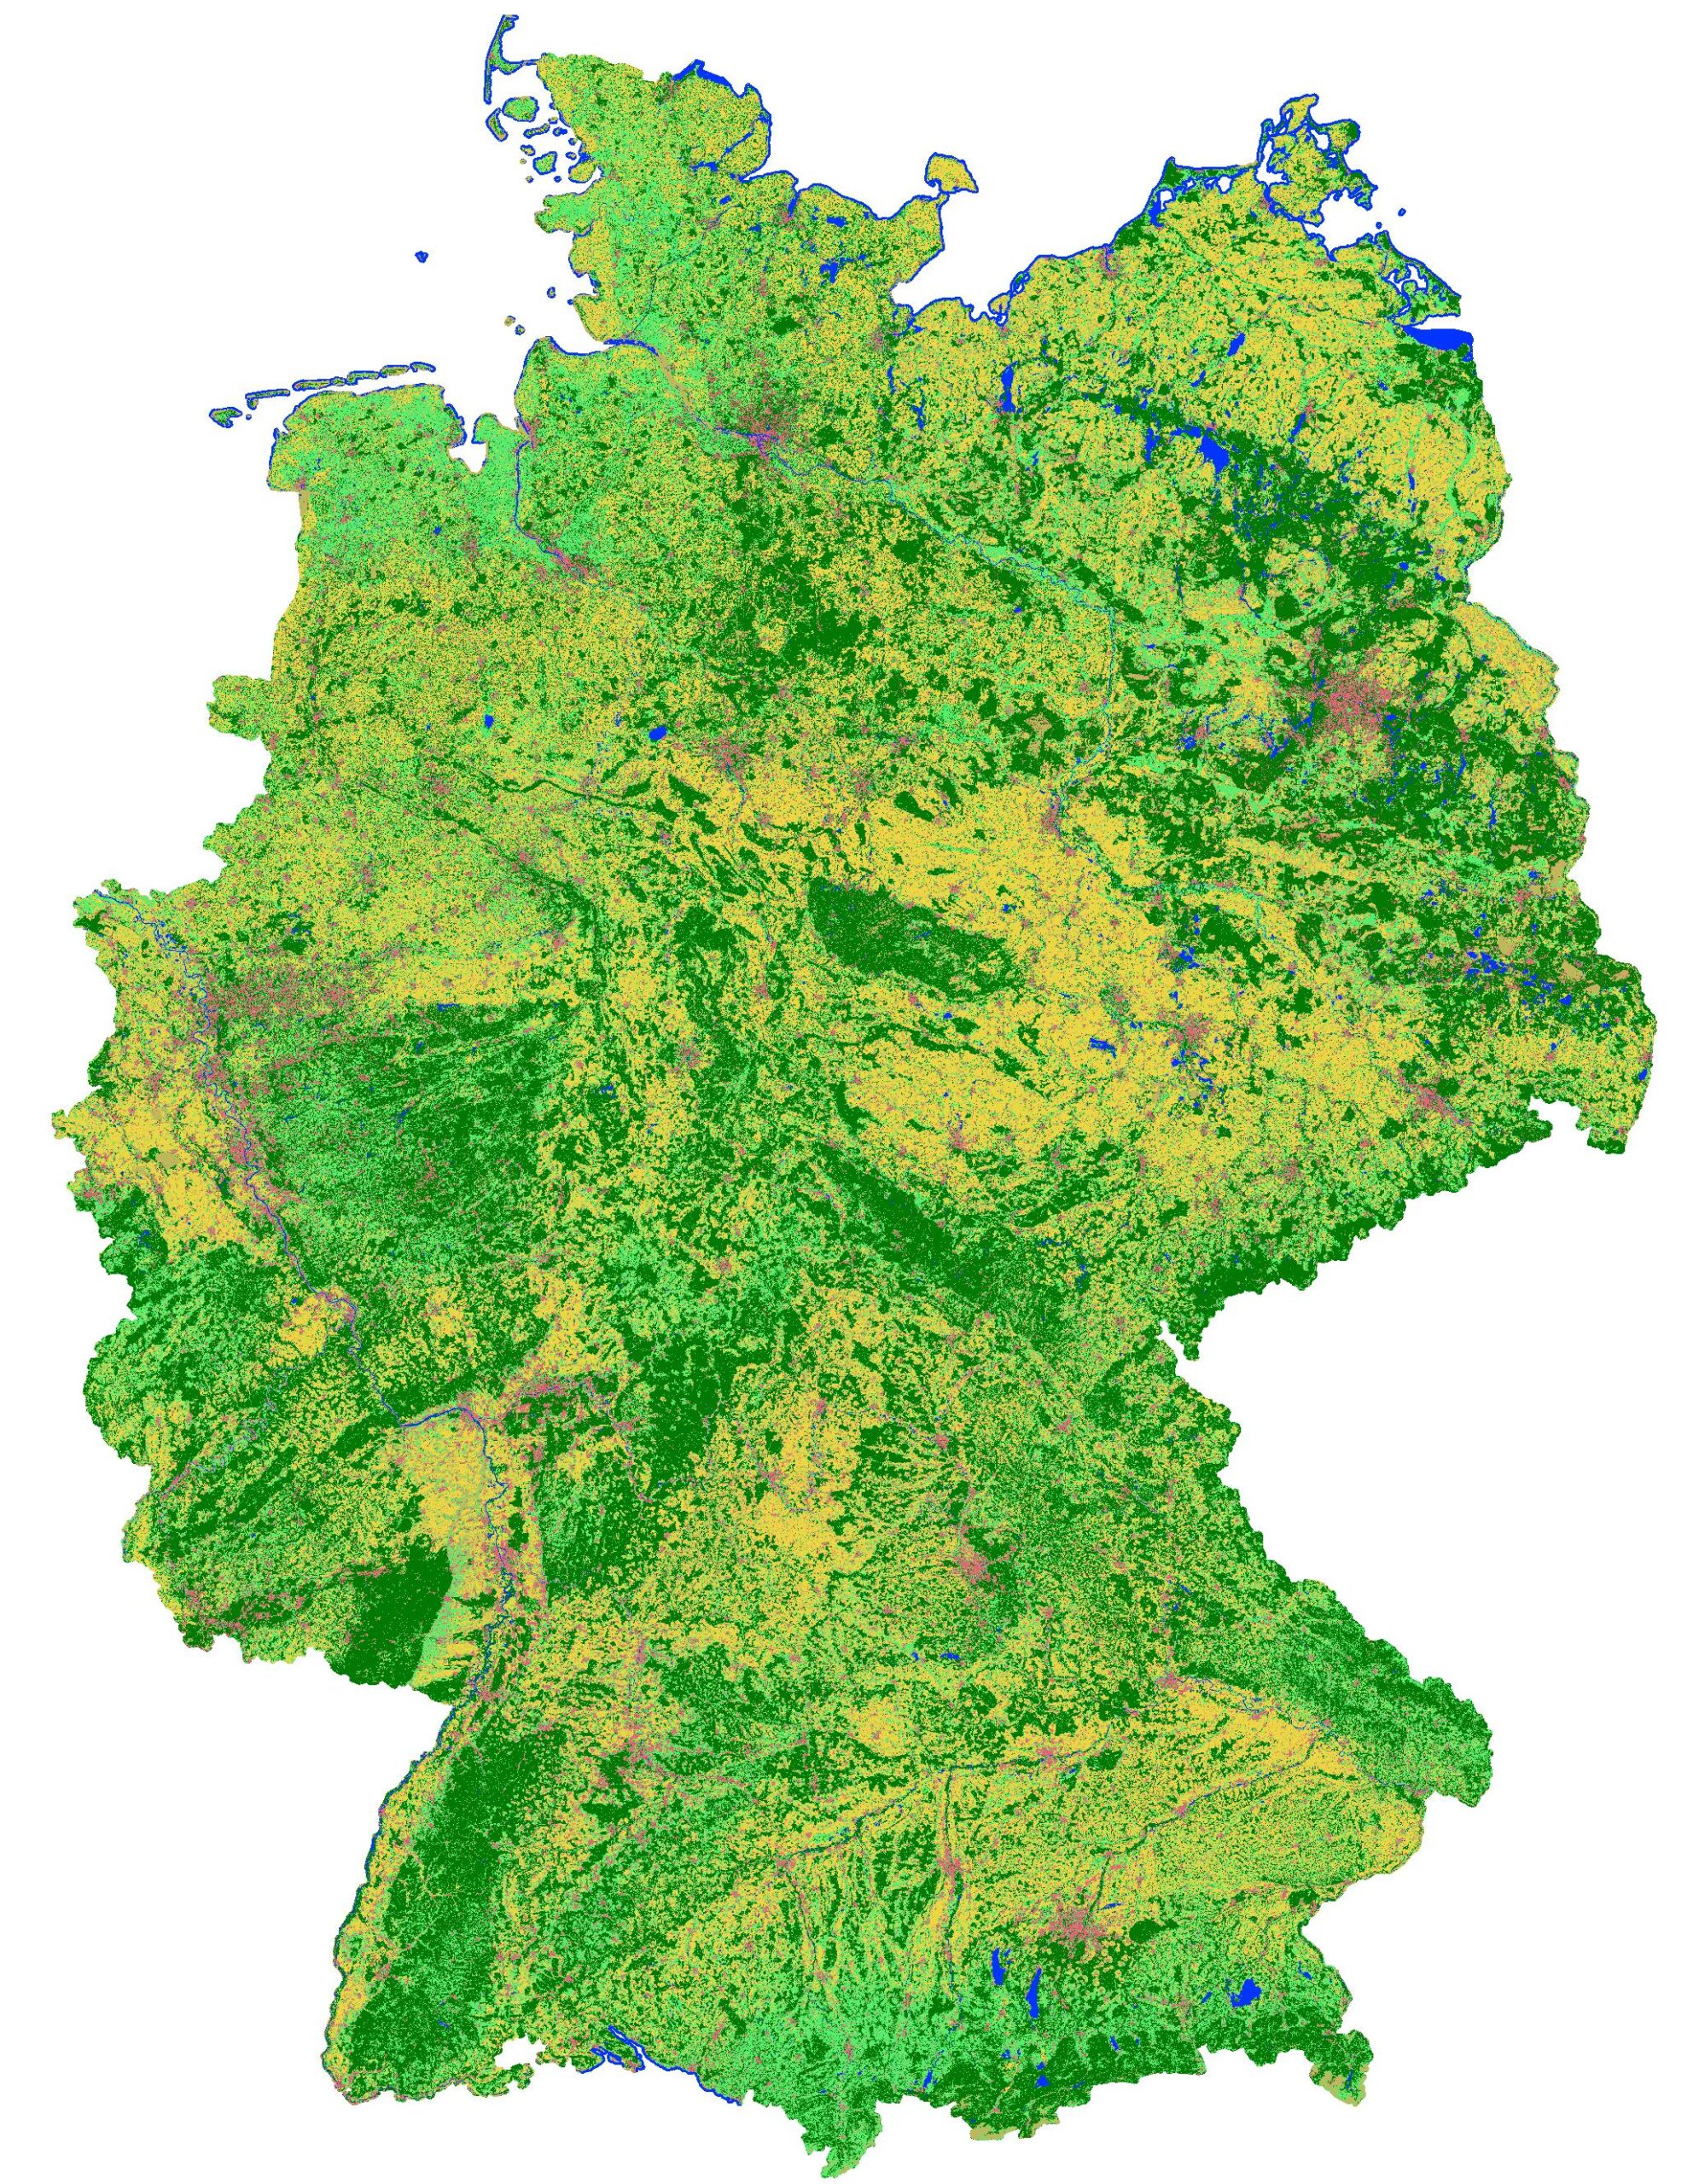 Map of Germany of the land cover classification results for 2020